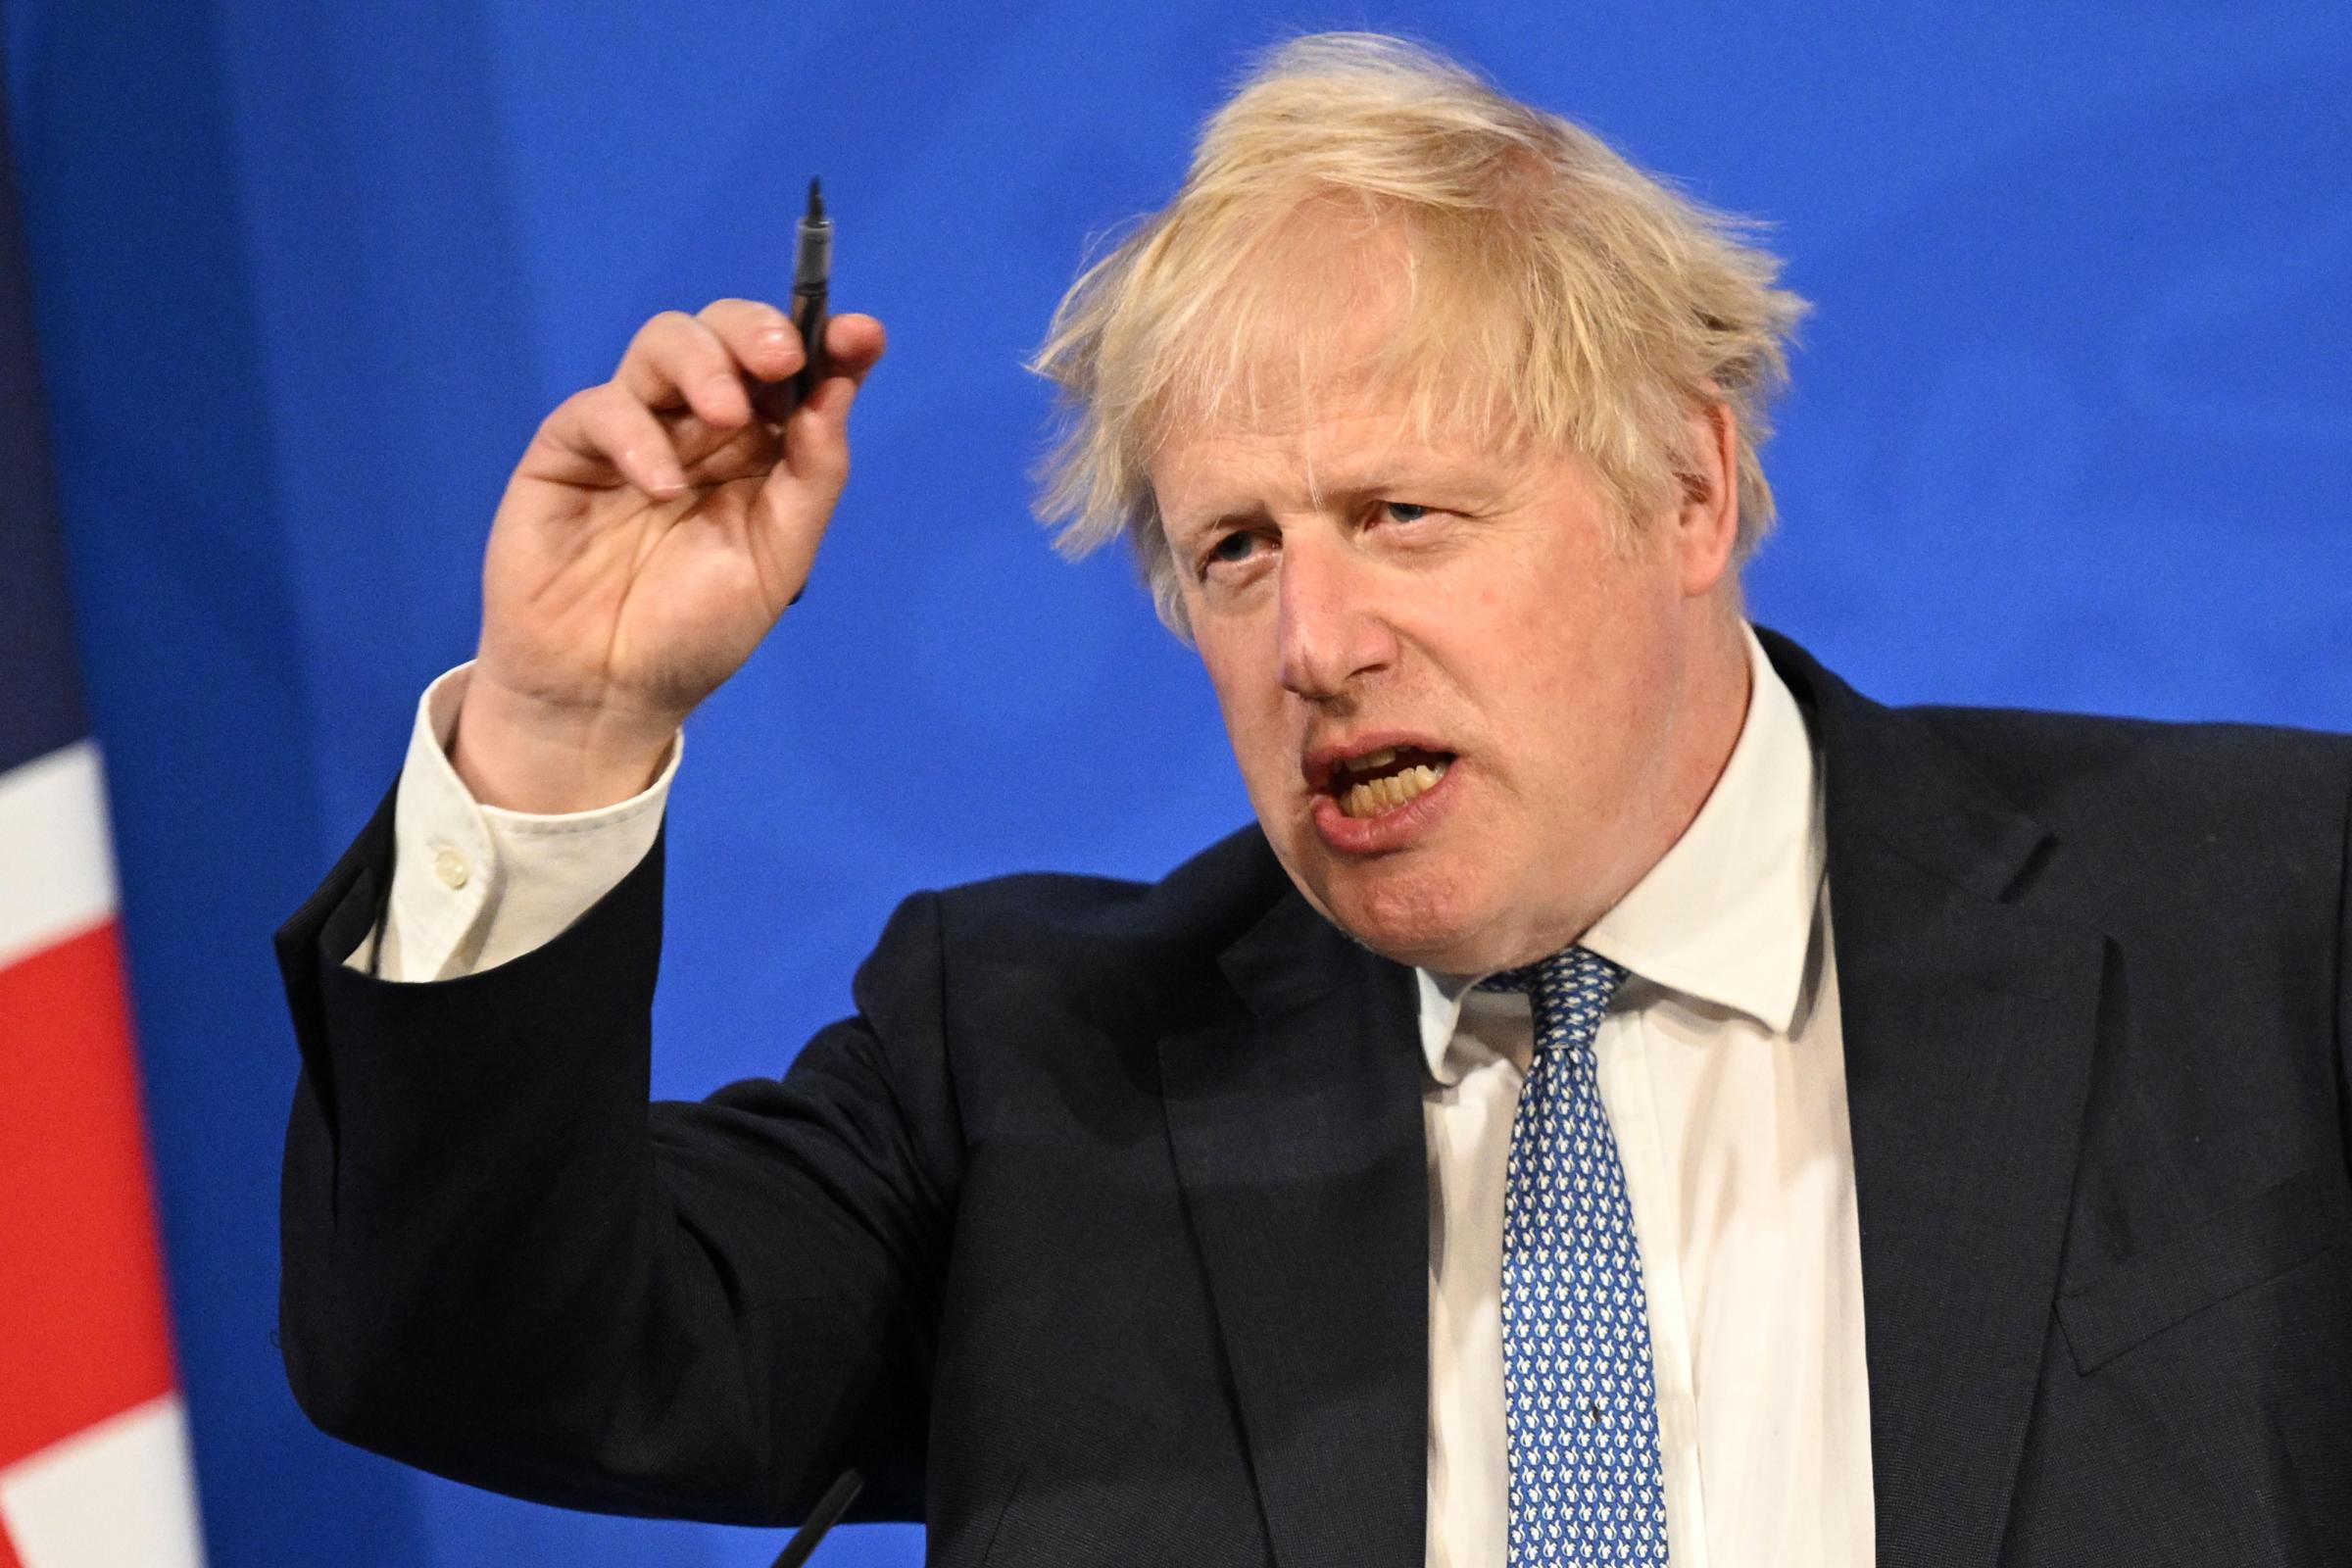 Boris Johnson press conference sparks altercation with Sky News's Beth Rigby